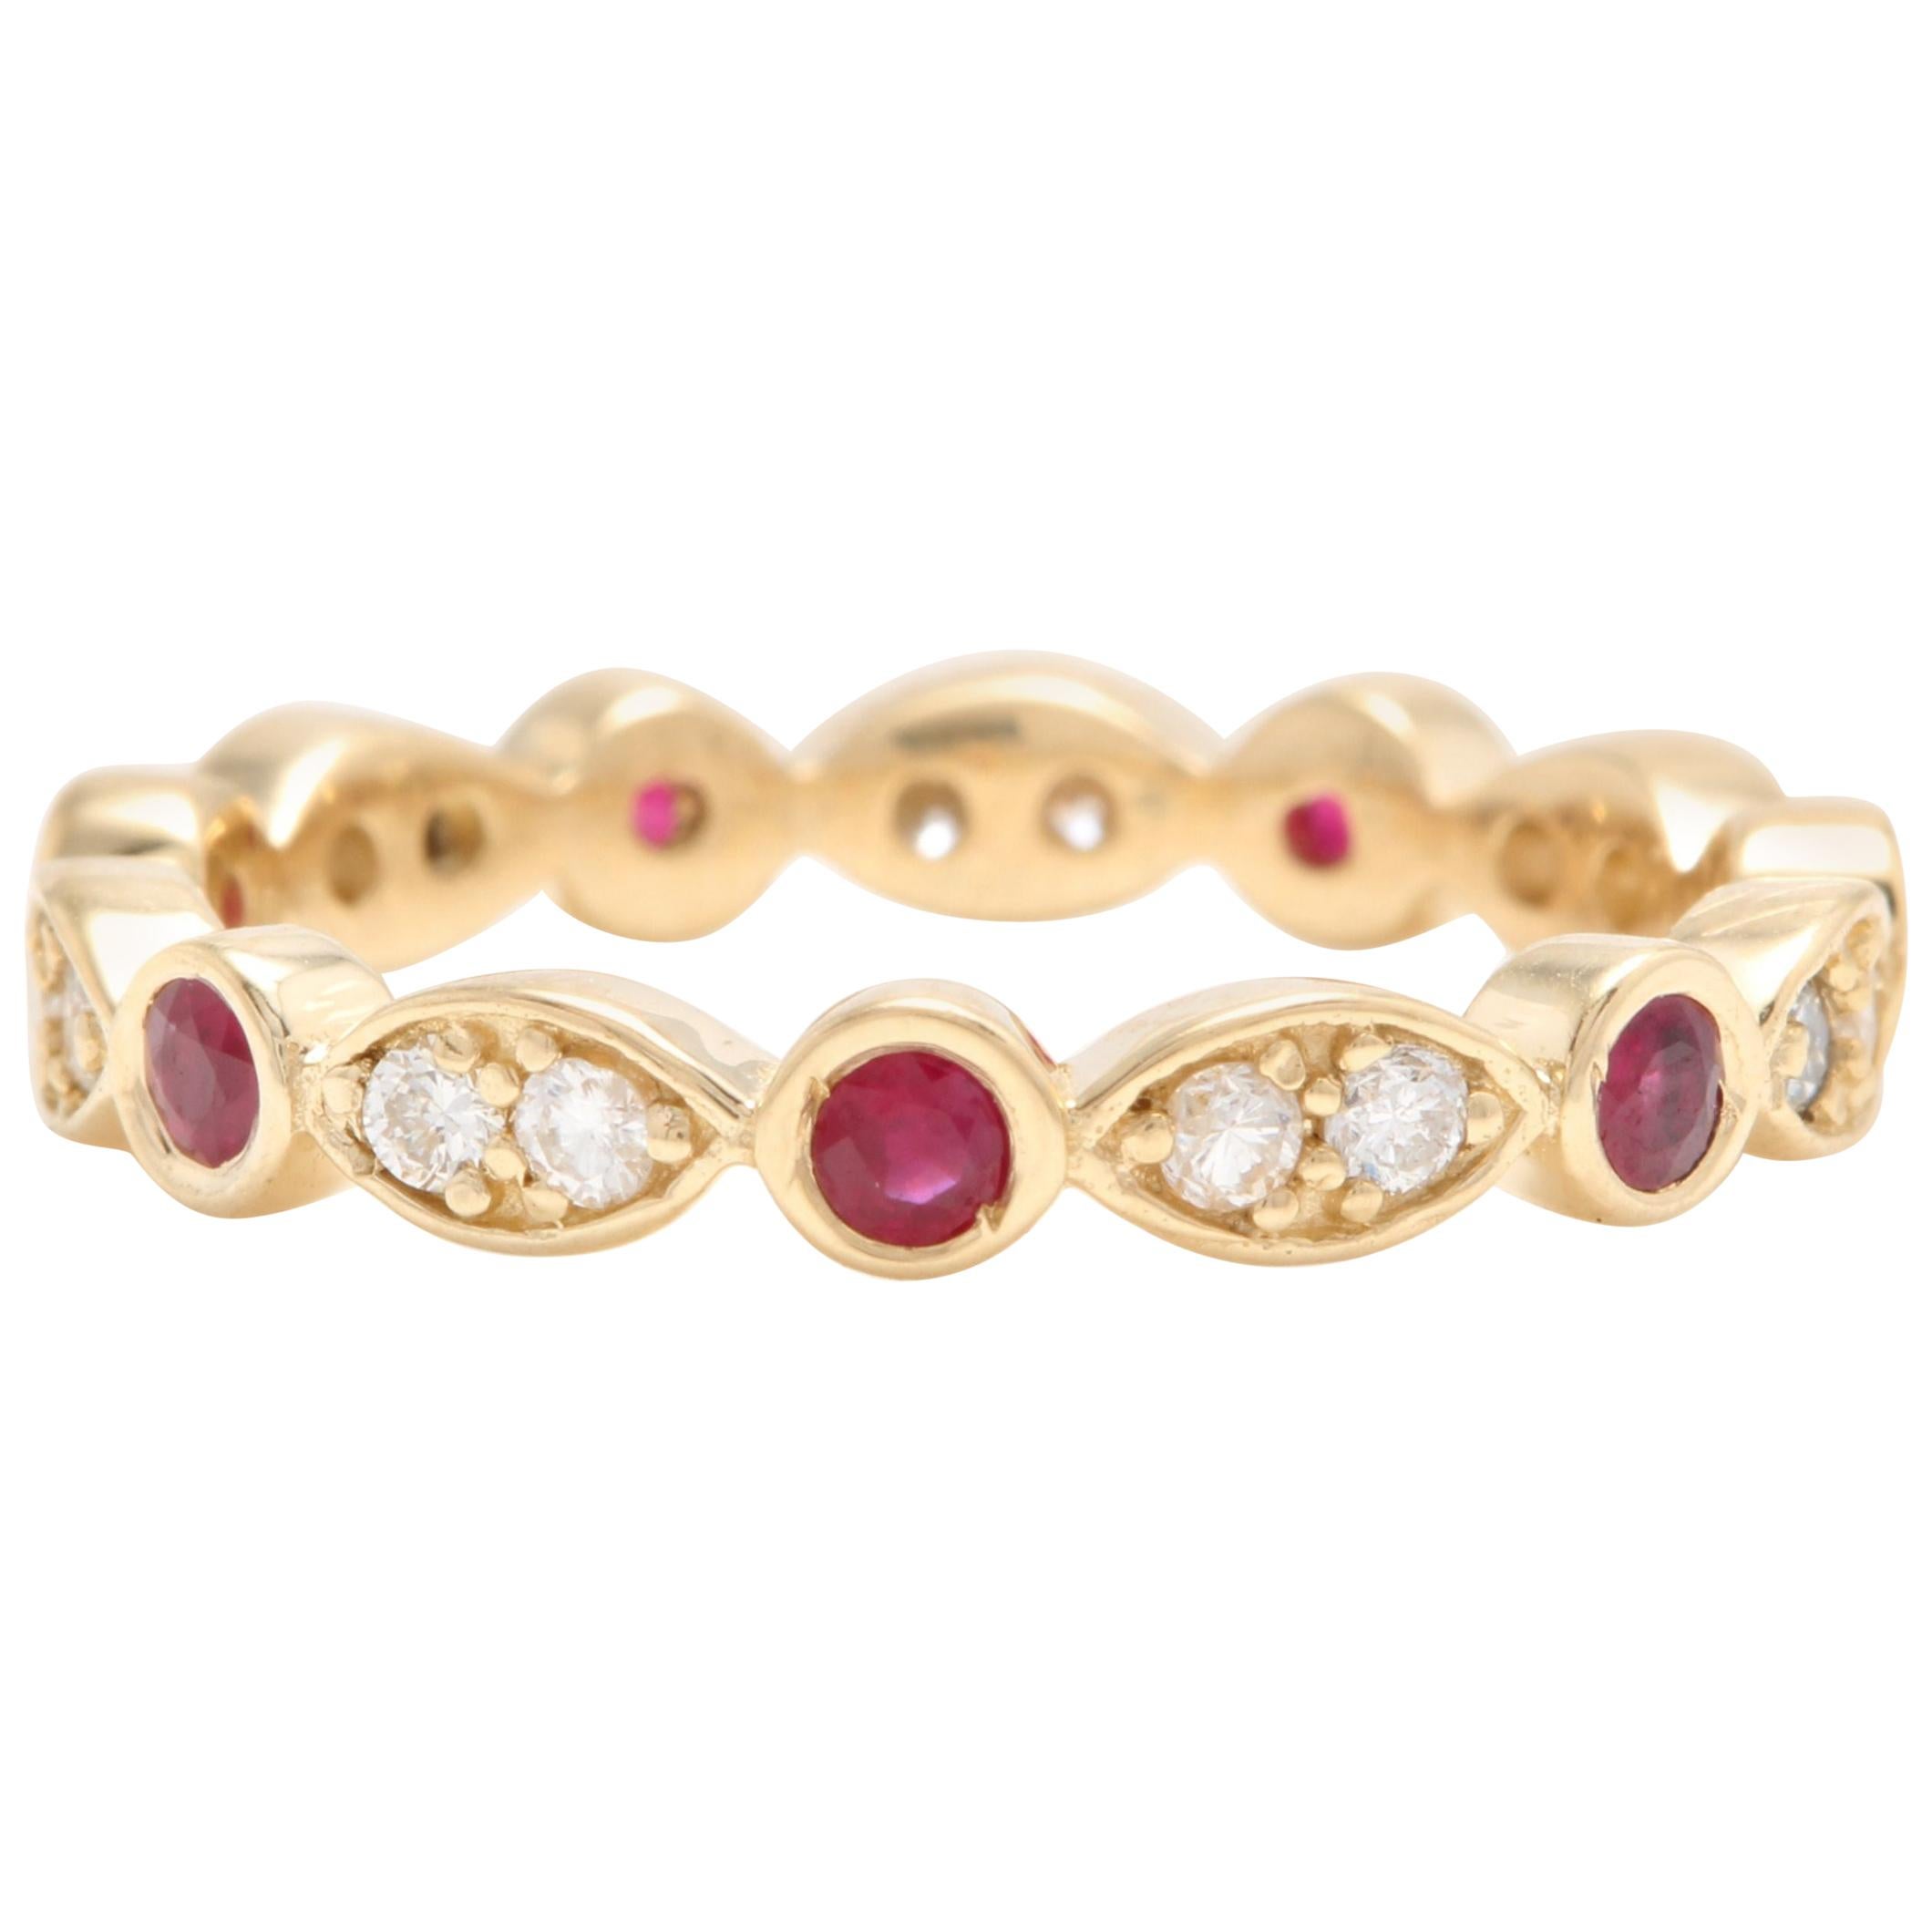 Impressive Natural Untreated Ruby and Natural Diamond 14 Karat White Gold Ring For Sale